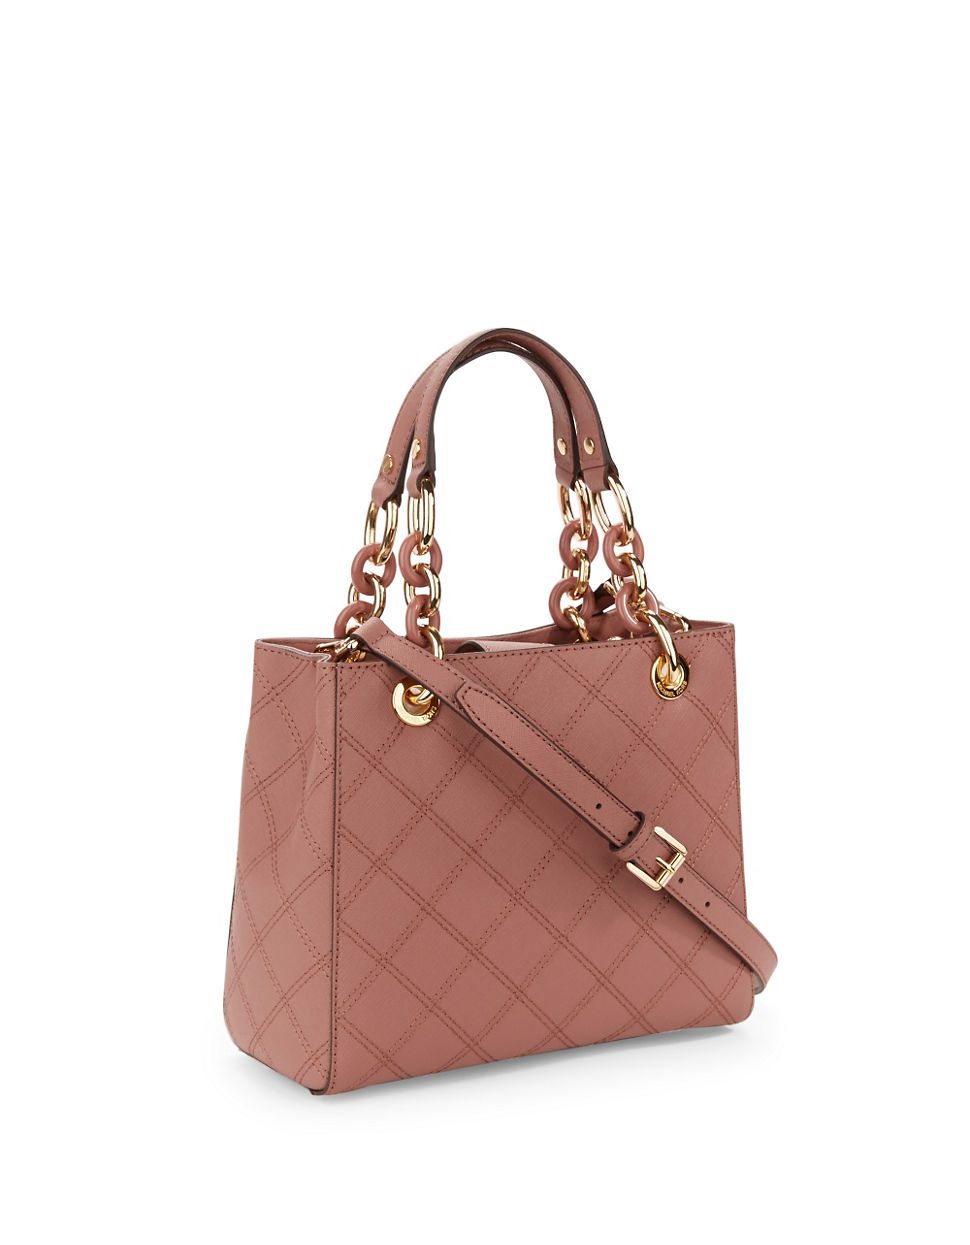 Michael michael kors Cynthia Small Leather Satchel Bag in Pink | Lyst